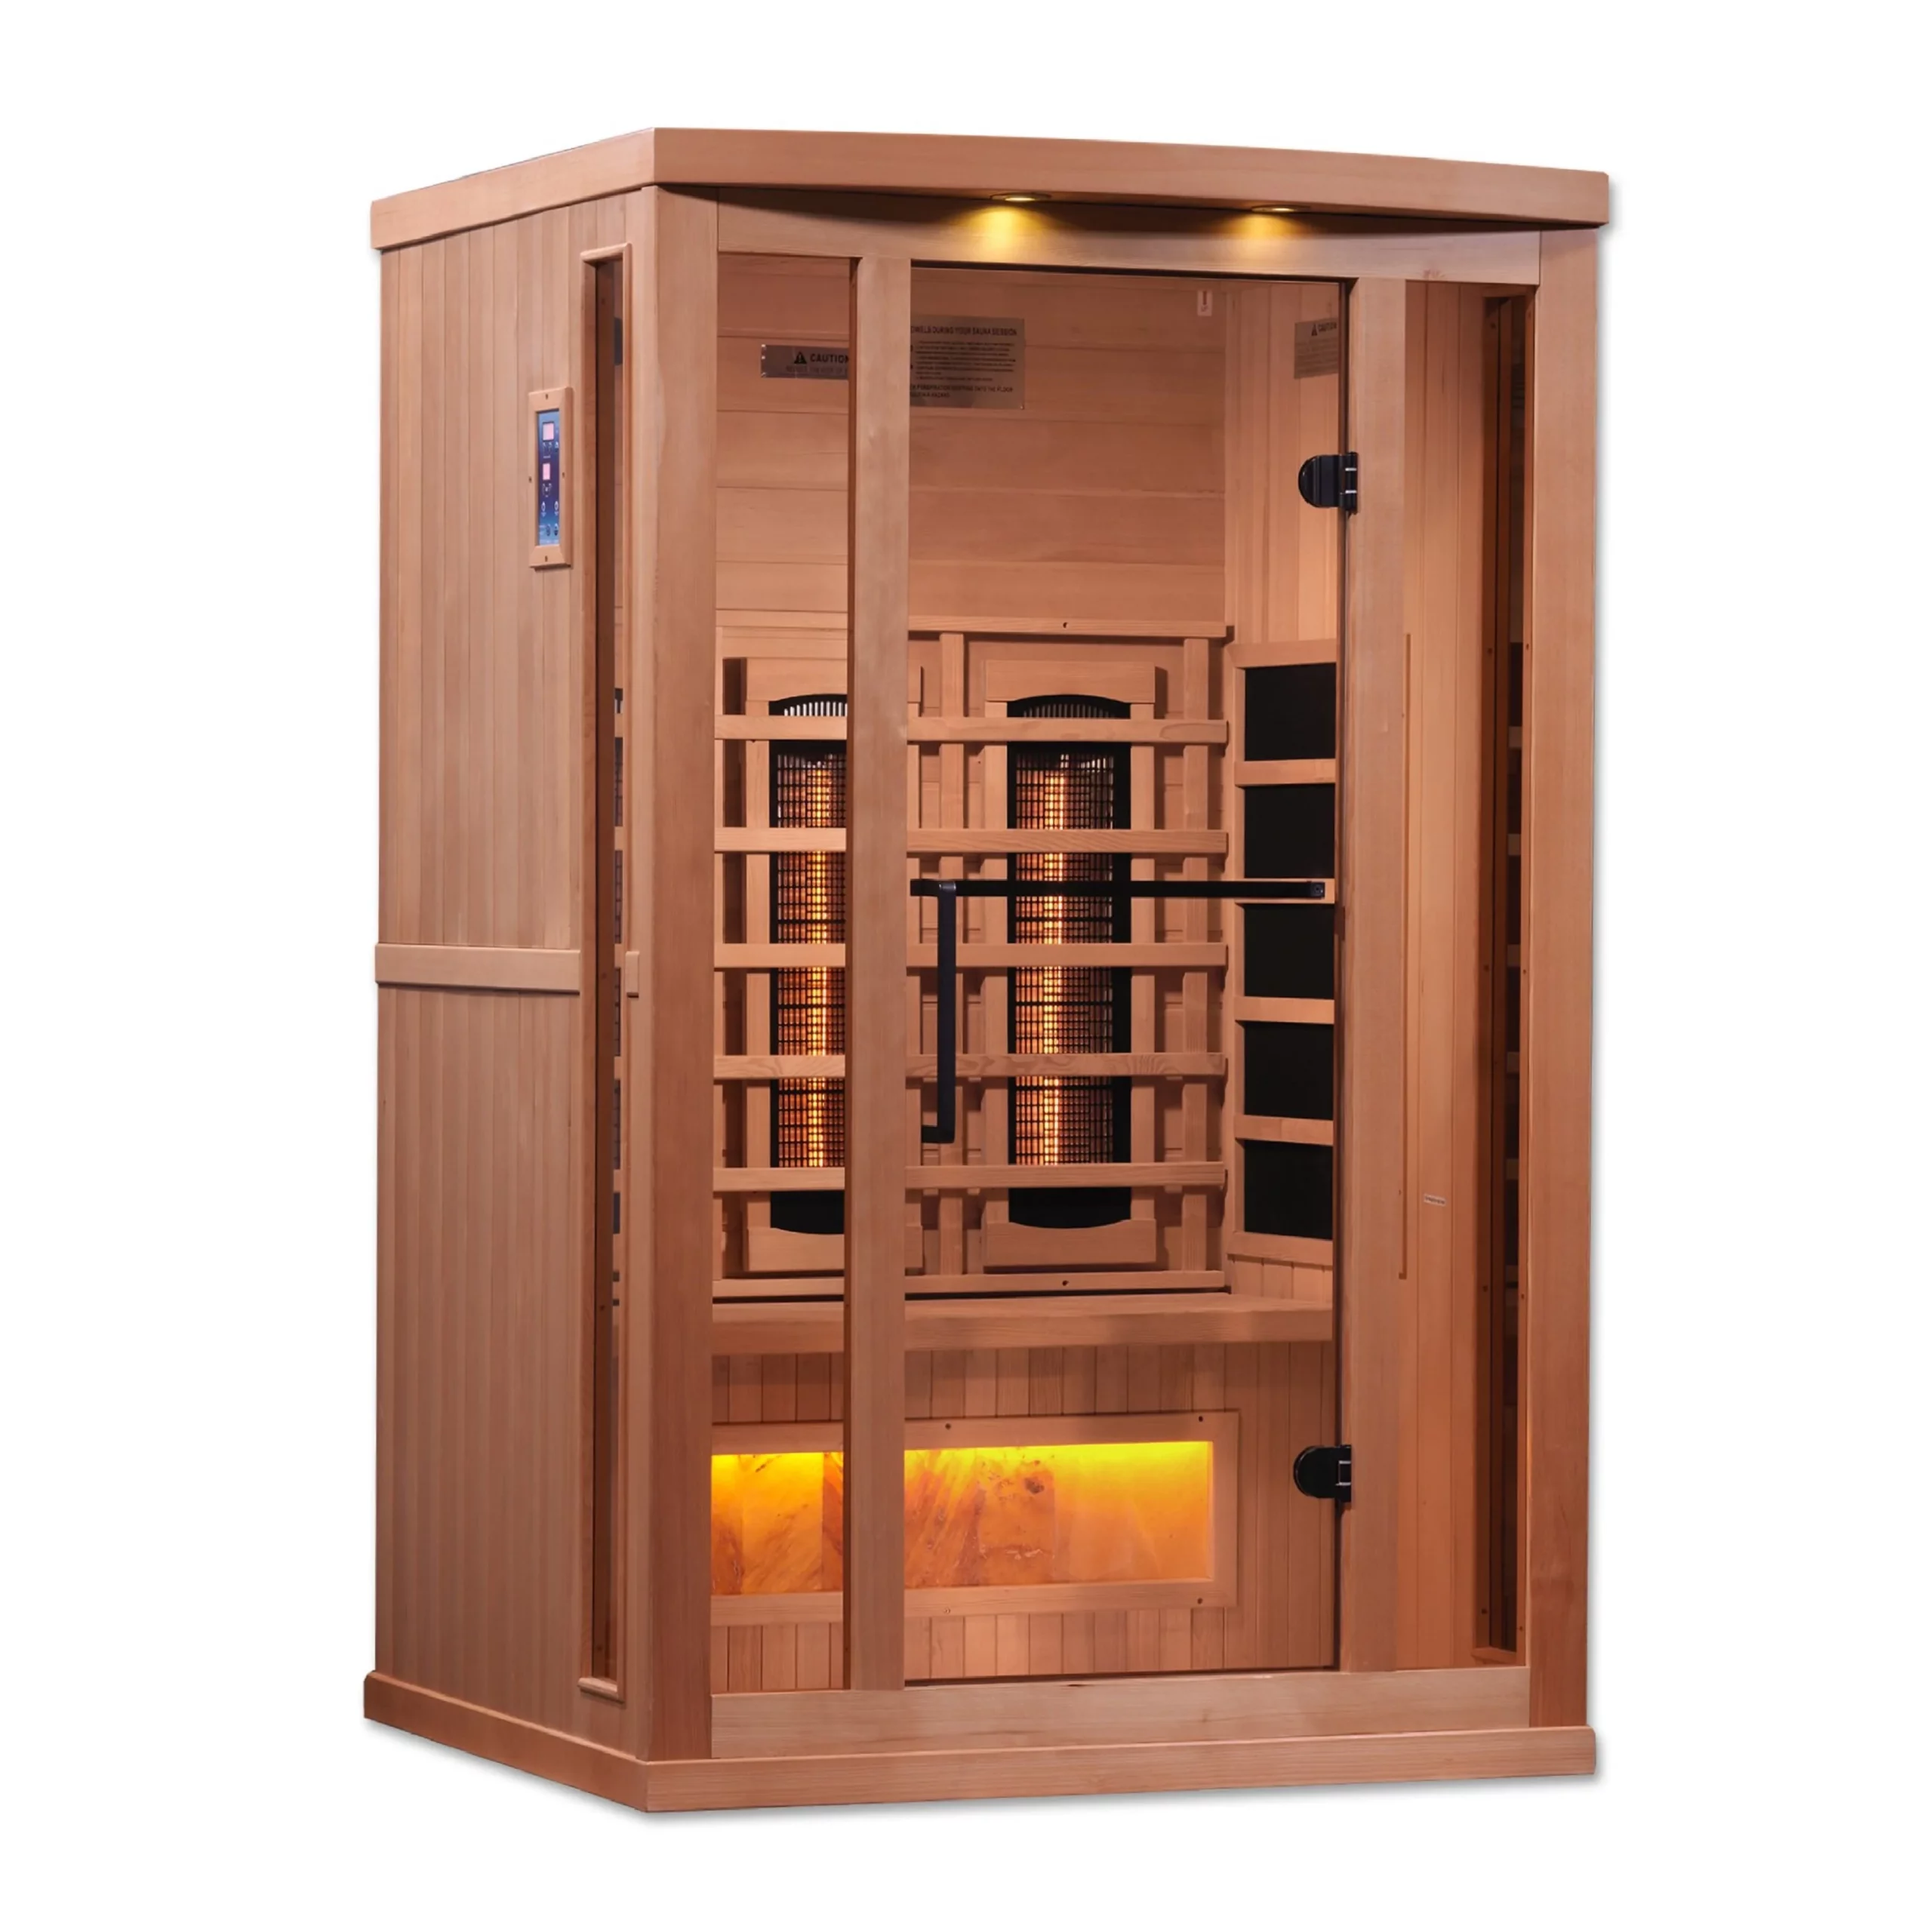 Enhancing Overall Wellness With Infrared Sauna